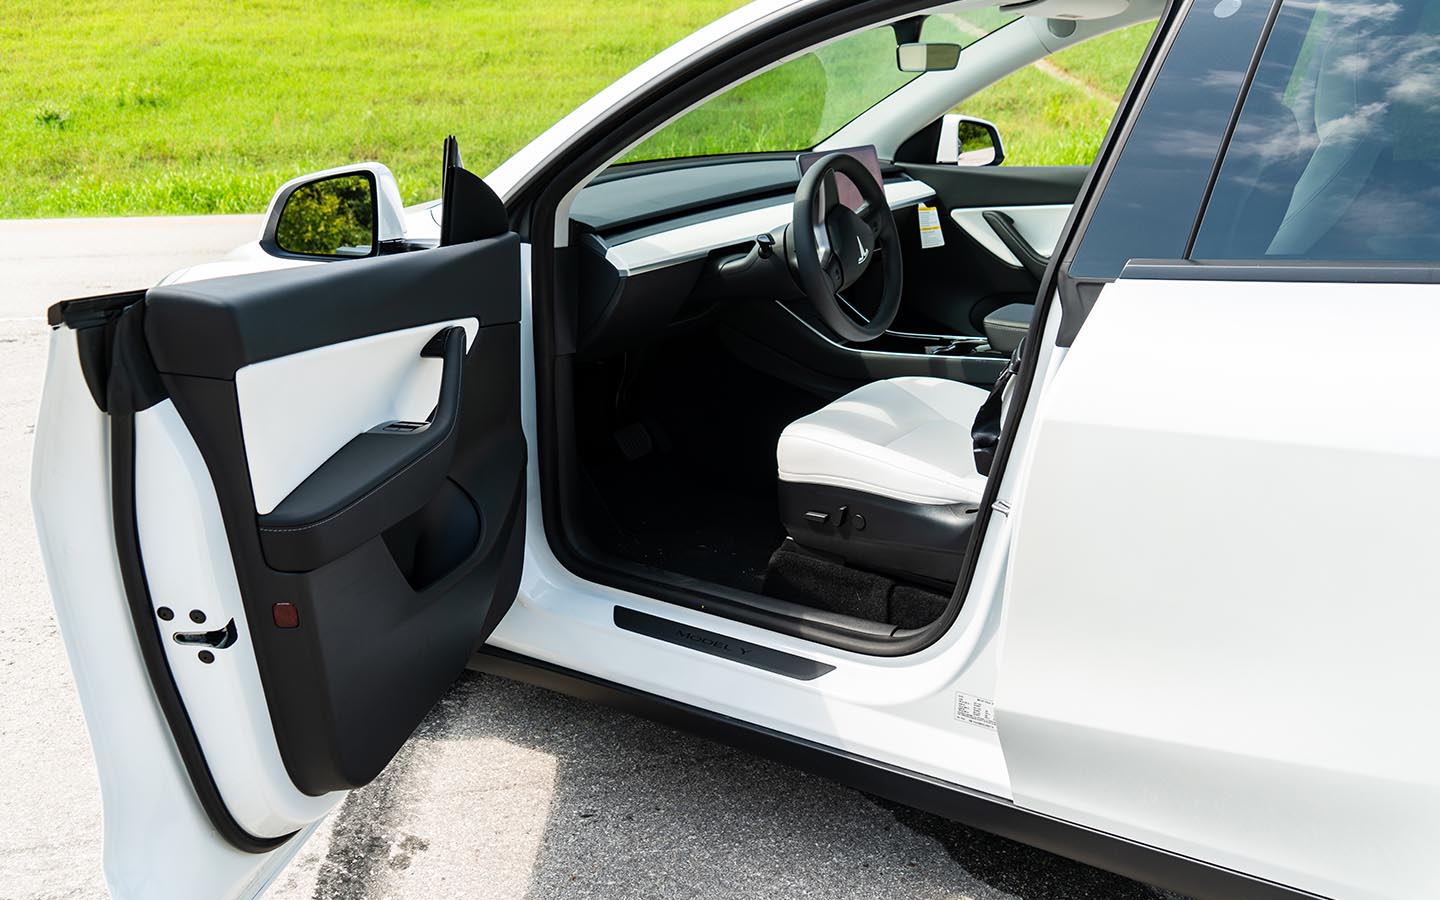 one of the effective Tips to Secure Your Tesla Vehicle is to use the auto door locking feature